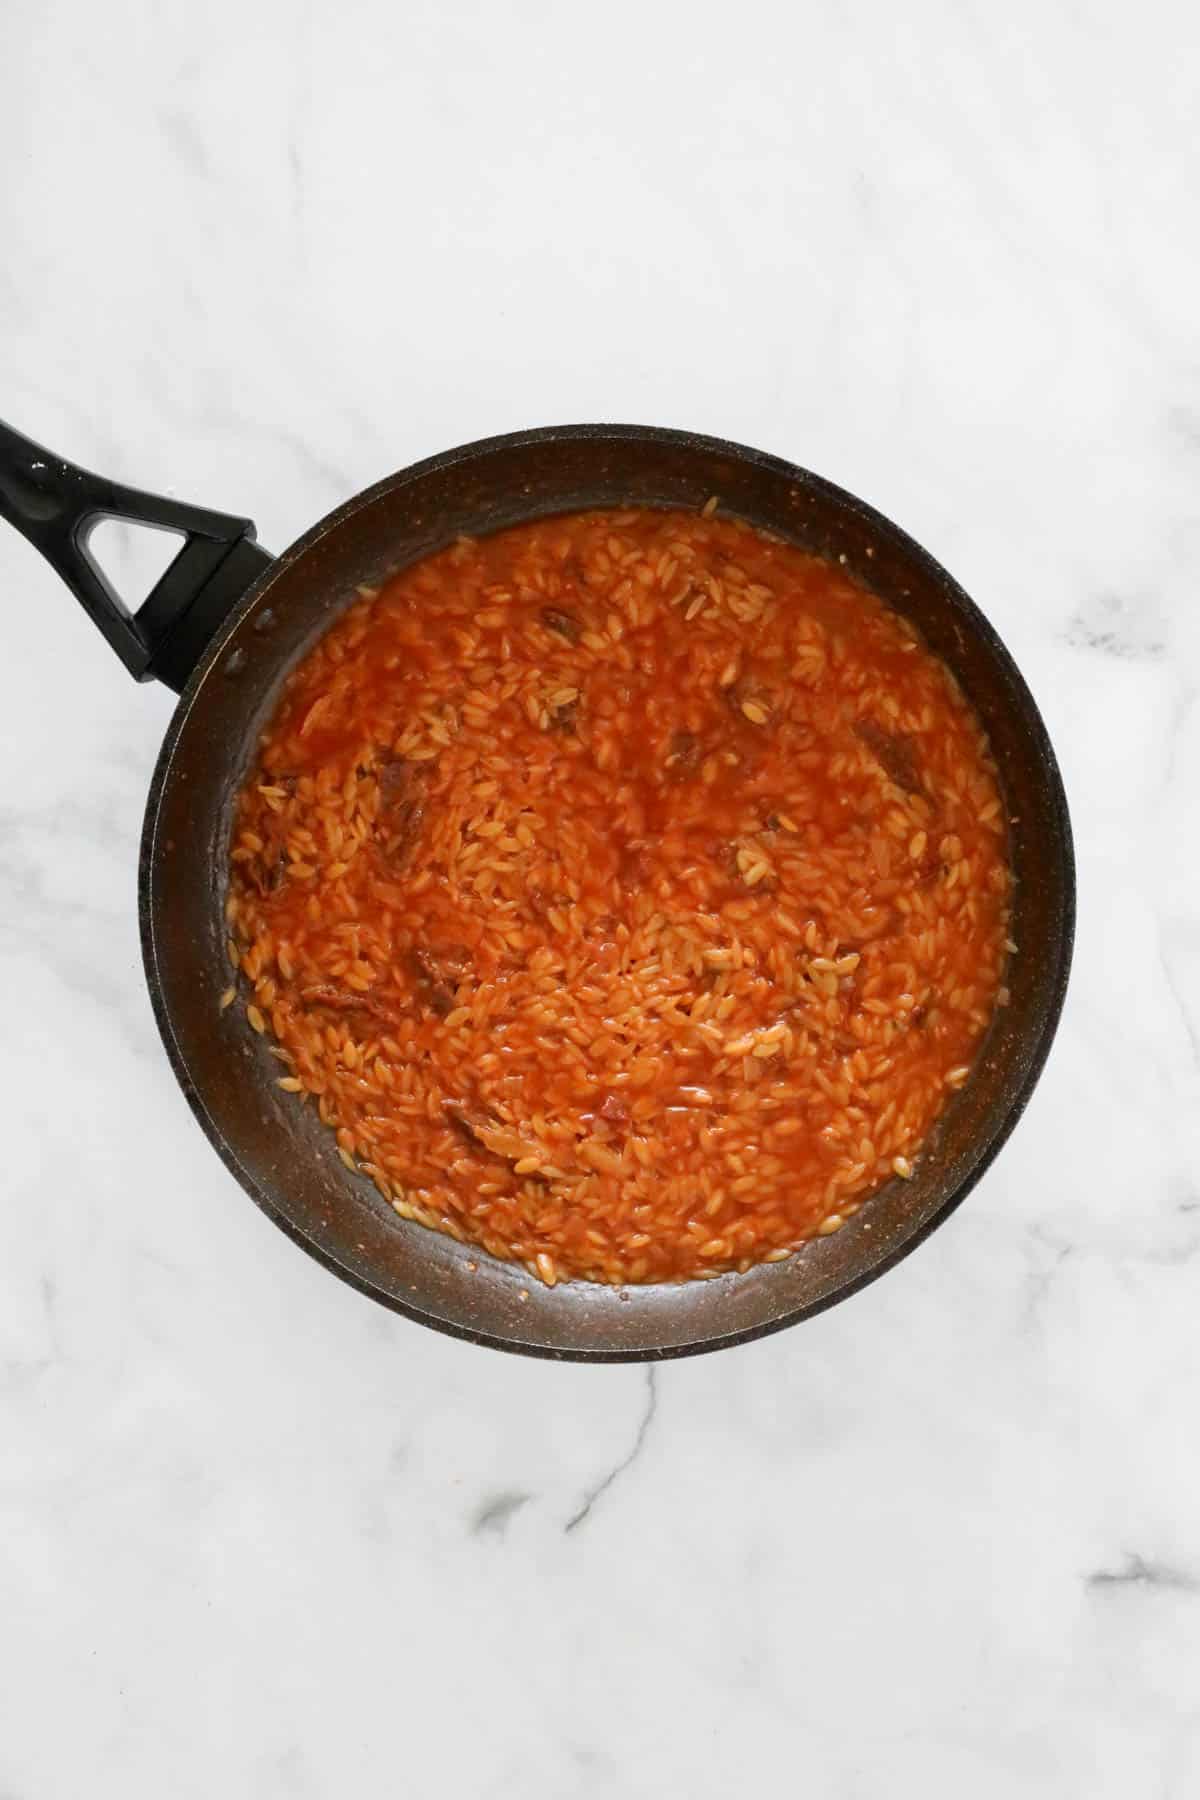 The cooked tomato risoni in a frying pan.